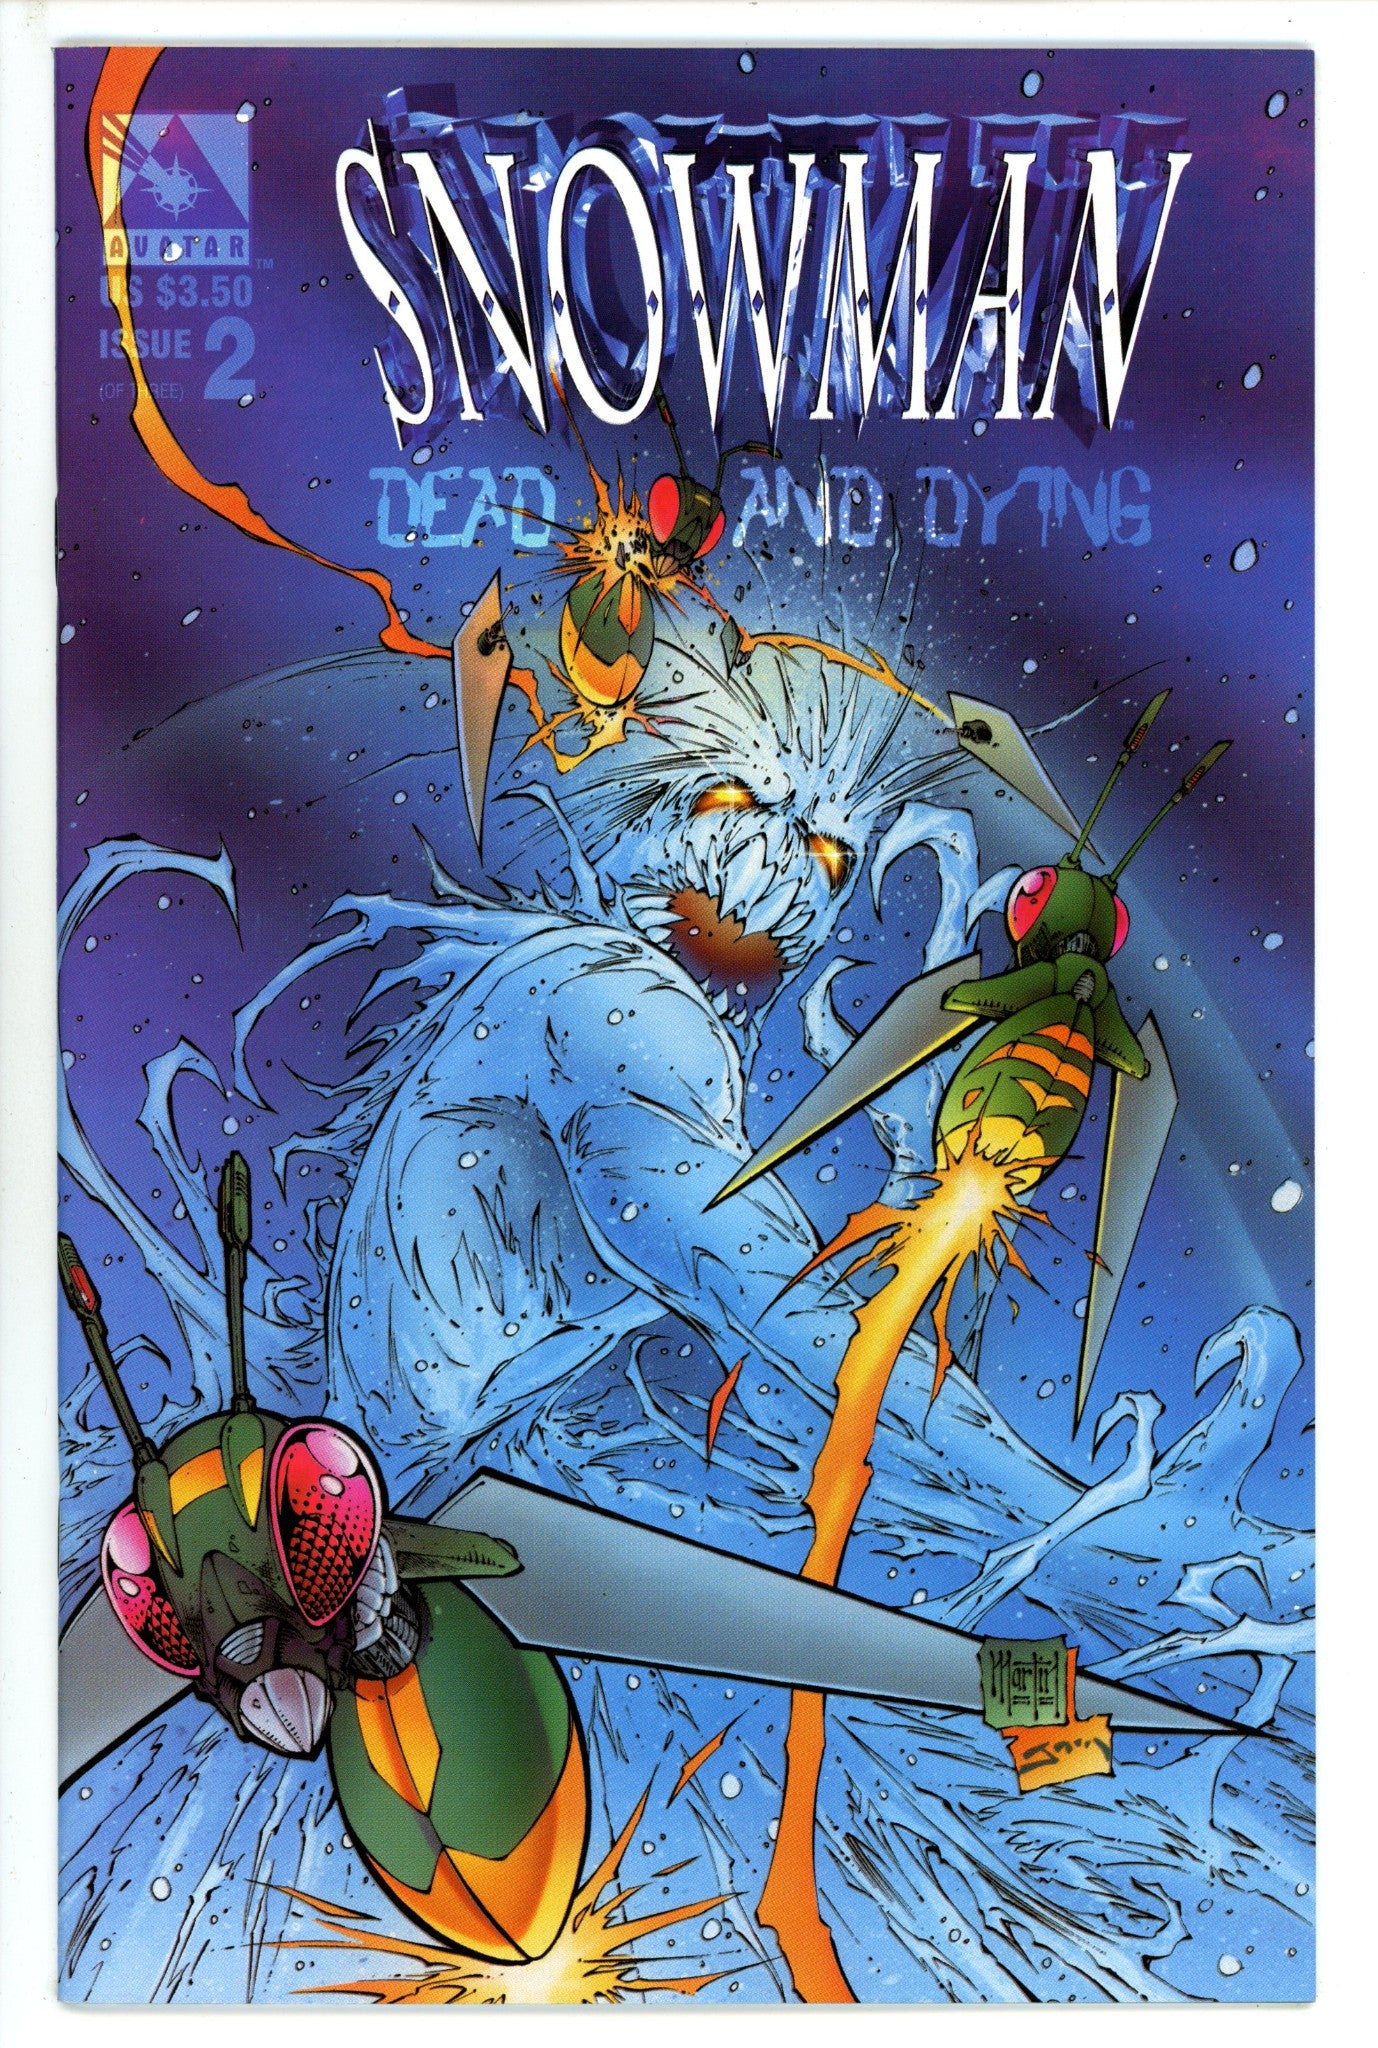 Snowman: Dead and Dying 2 (1998)